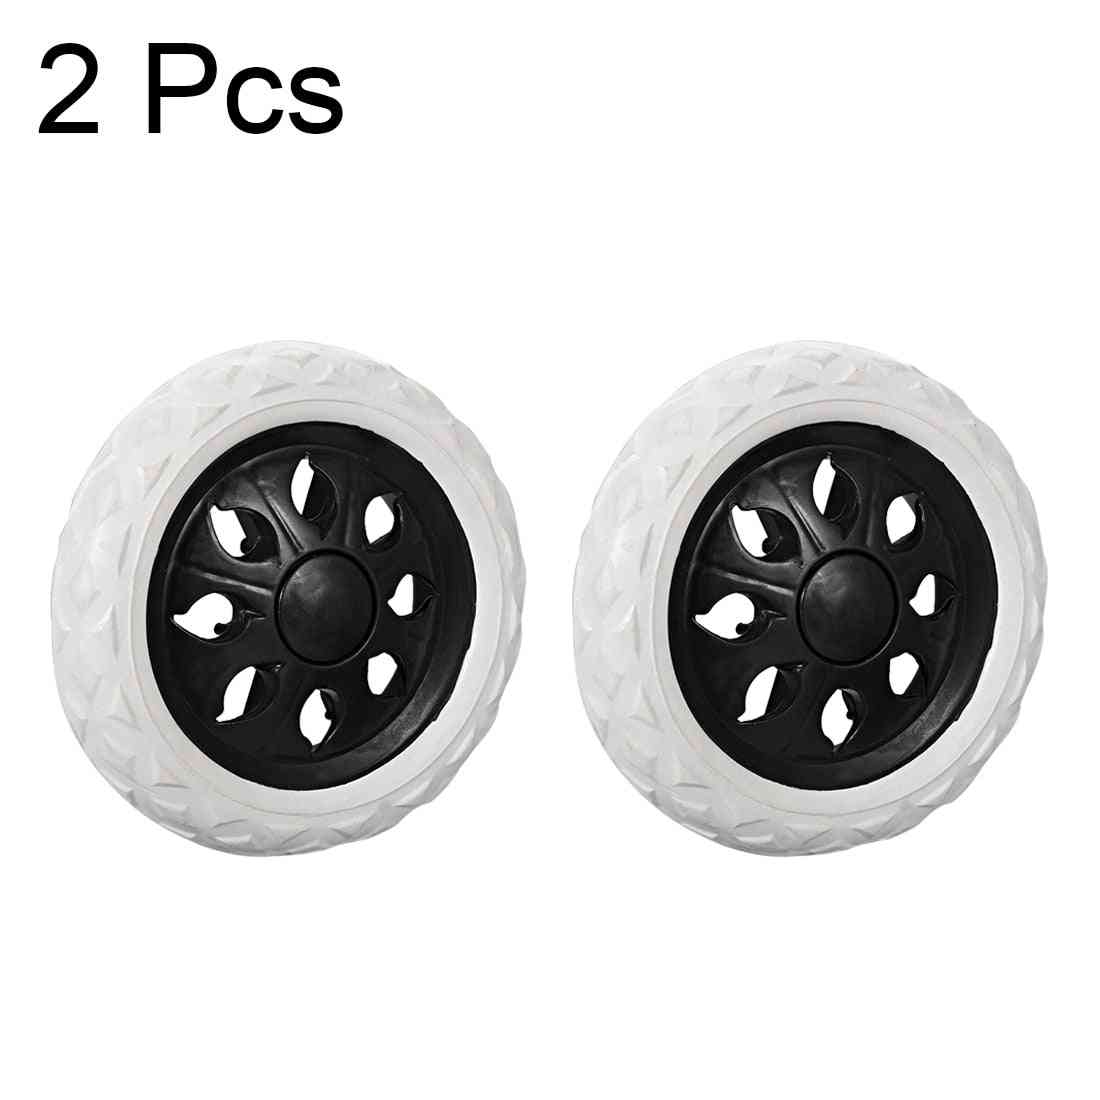 2pcs Shopping Trolley Caster Replacement Wheels